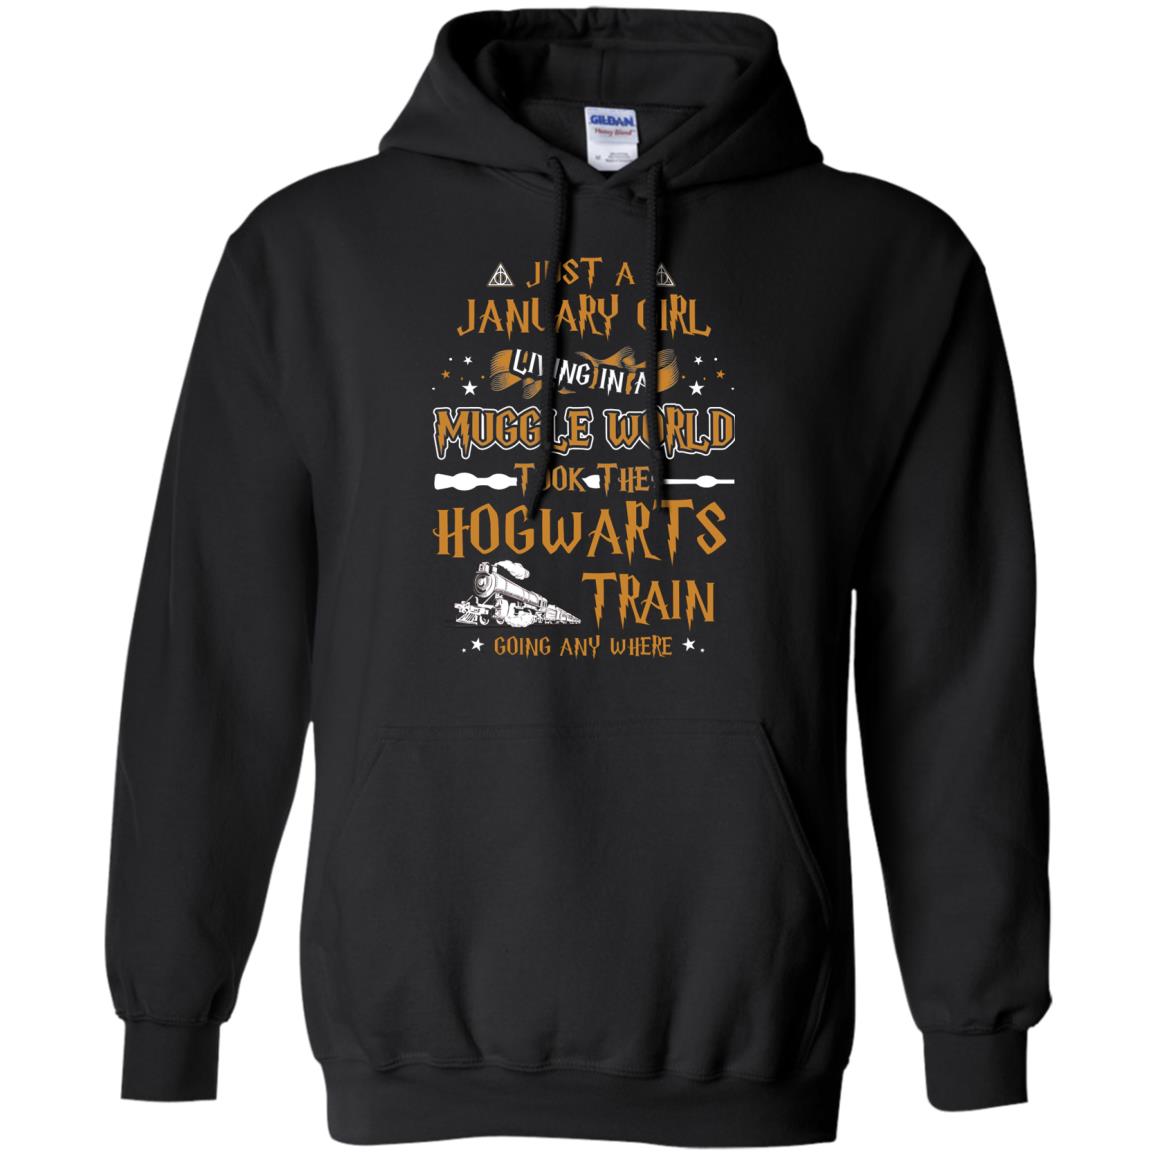 Just A January Girl Living In A Muggle World Took The Hogwarts Train Going Any WhereG185 Gildan Pullover Hoodie 8 oz.